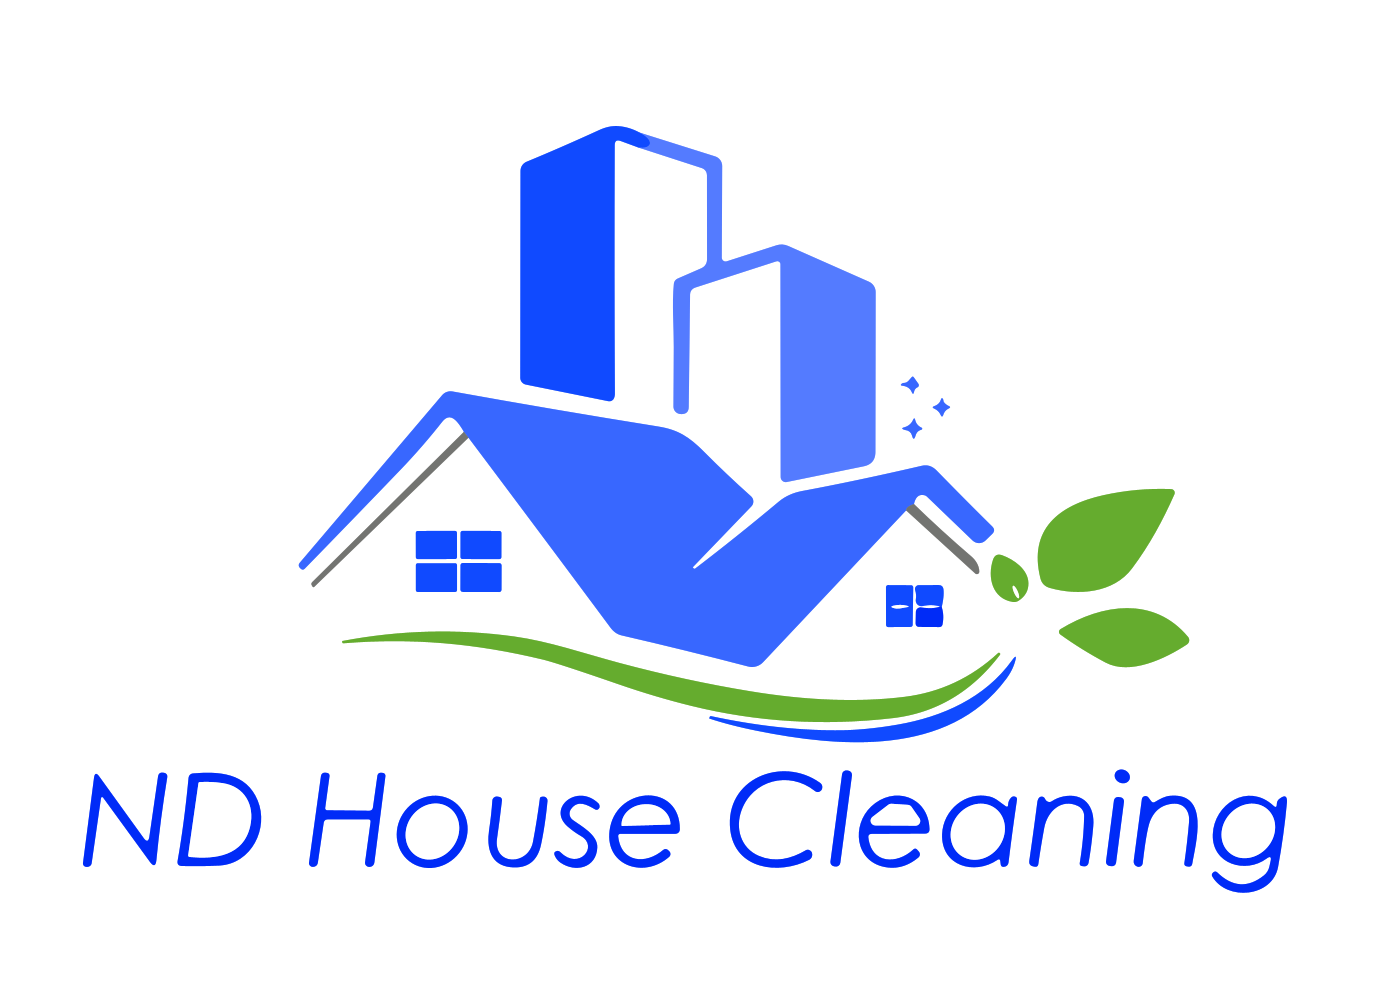 ND House Cleaning offers services of Residential Cleaning, Deep Cleaning, Move Out - In, Airbnb Cleaning, Post Construction Cleaning, Commercial Cleaning in Alameda, Berkeley, Oakland, Richmond, Castro valley - Residential Cleaning